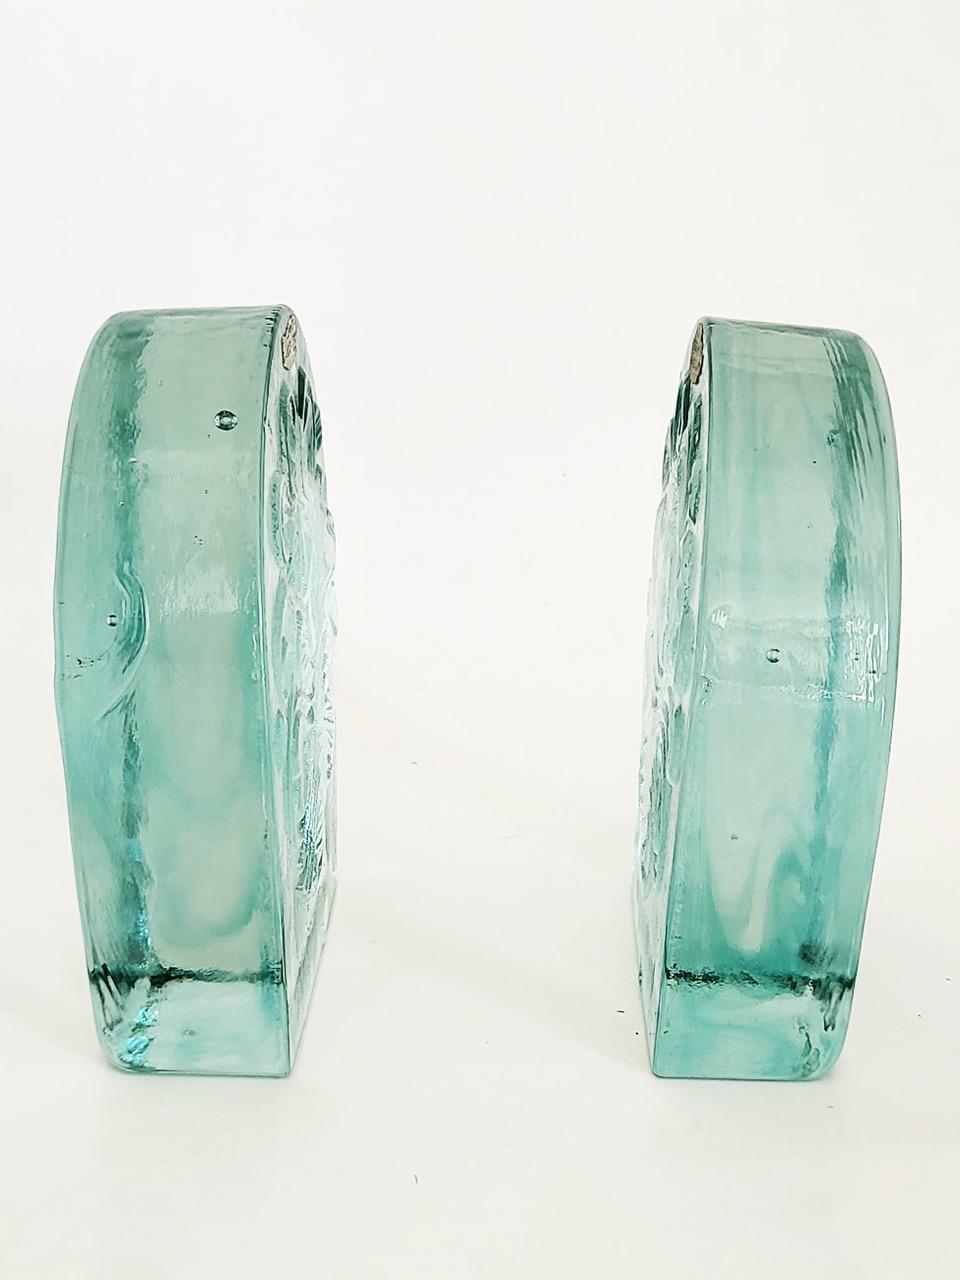 Blenko Glass Twisted Hearts Clear Block Bookends Wayne Husted, 1969 In Good Condition For Sale In Miami, FL